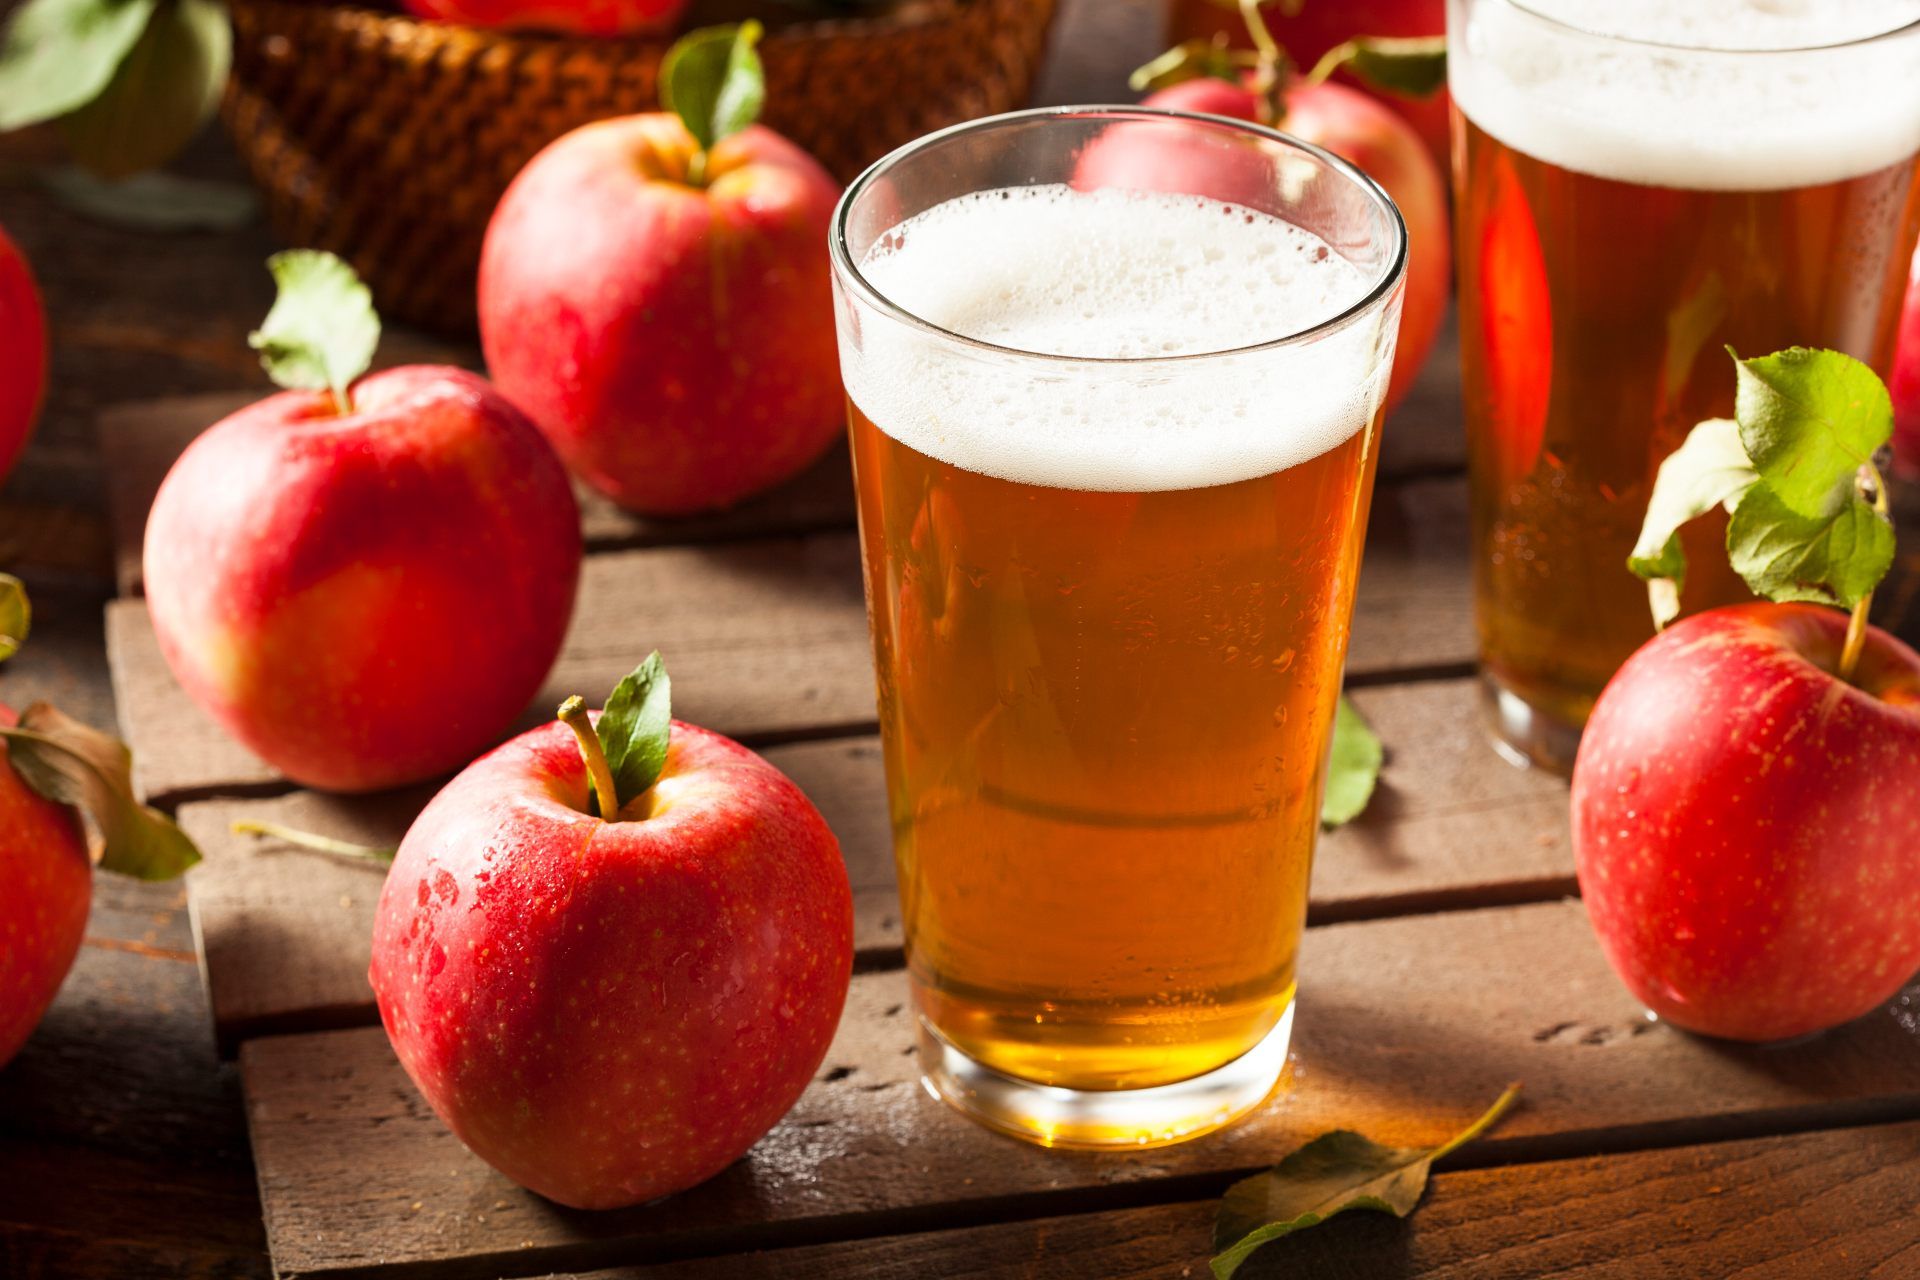 Hard apple cider in a glass surrounded by apples - hard cider